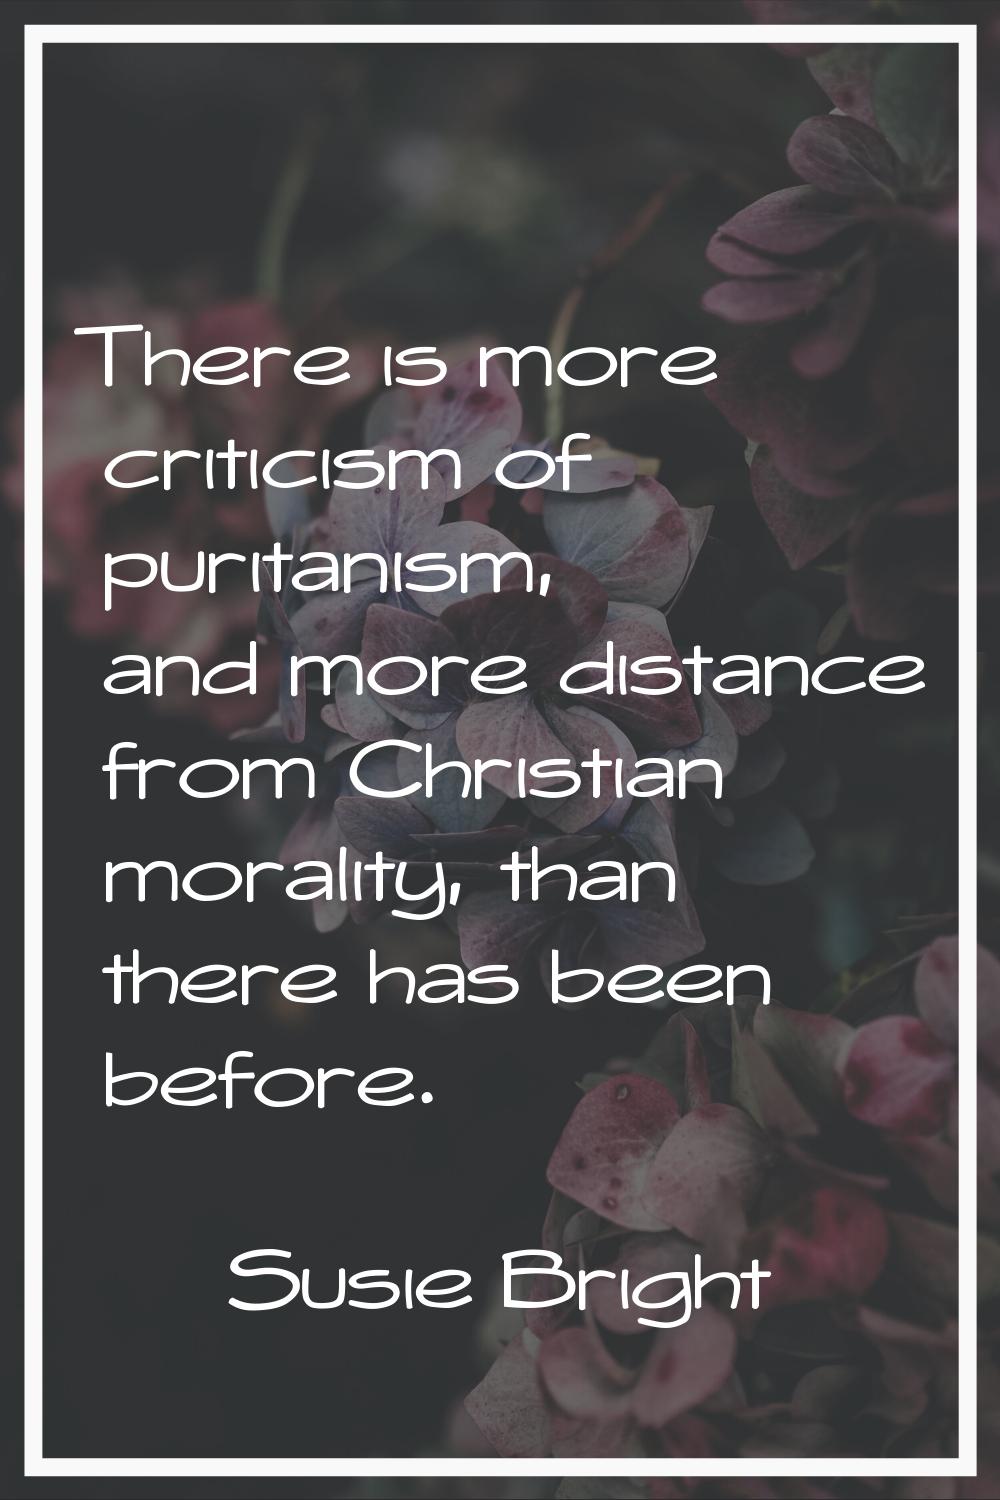 There is more criticism of puritanism, and more distance from Christian morality, than there has be